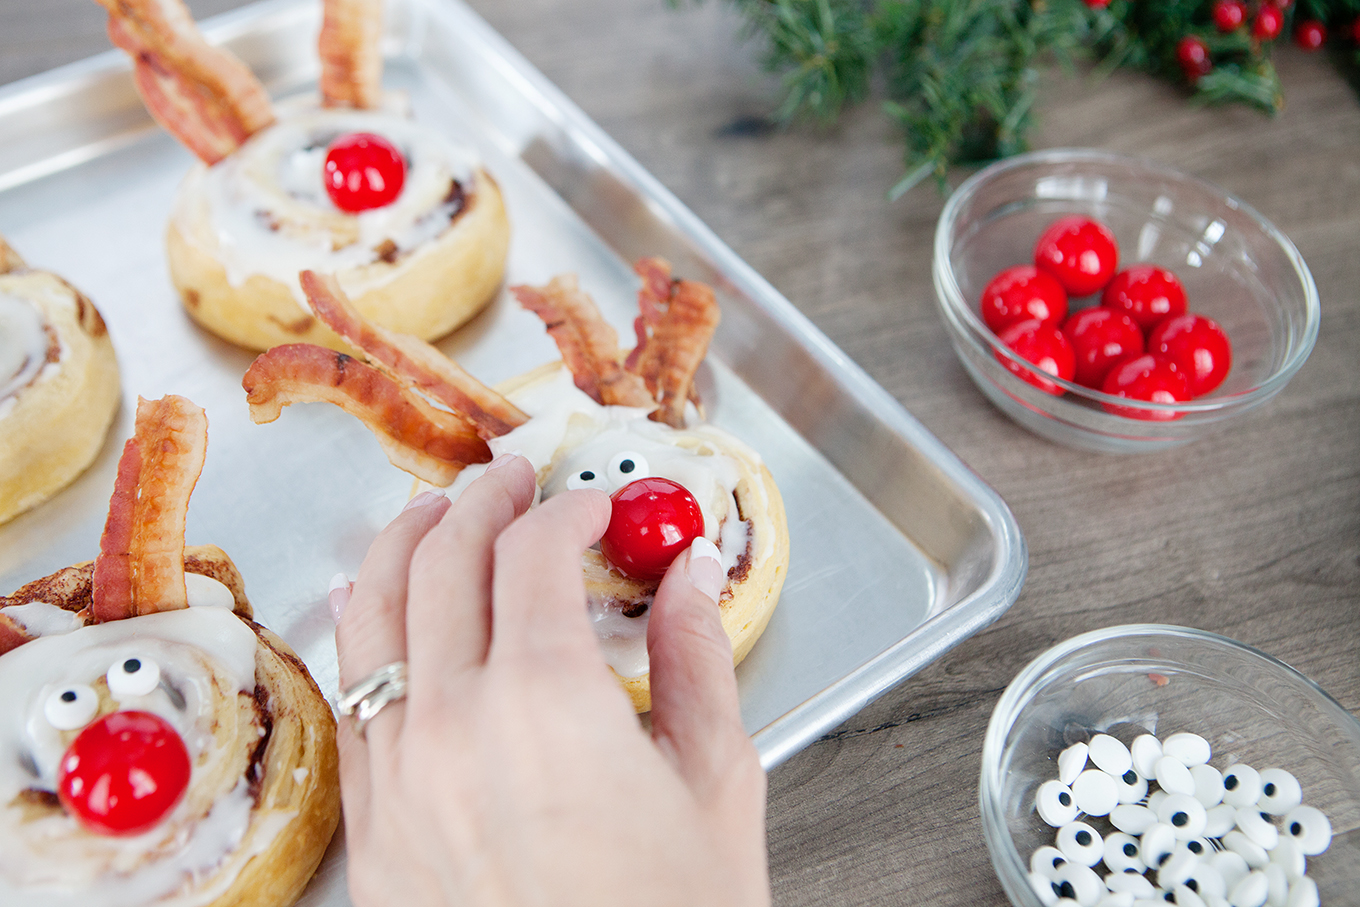 These Rudolph the Red-Nosed Reindeer Cinnamon Rolls will help make the holidays a bit more magical with minimal effort required!